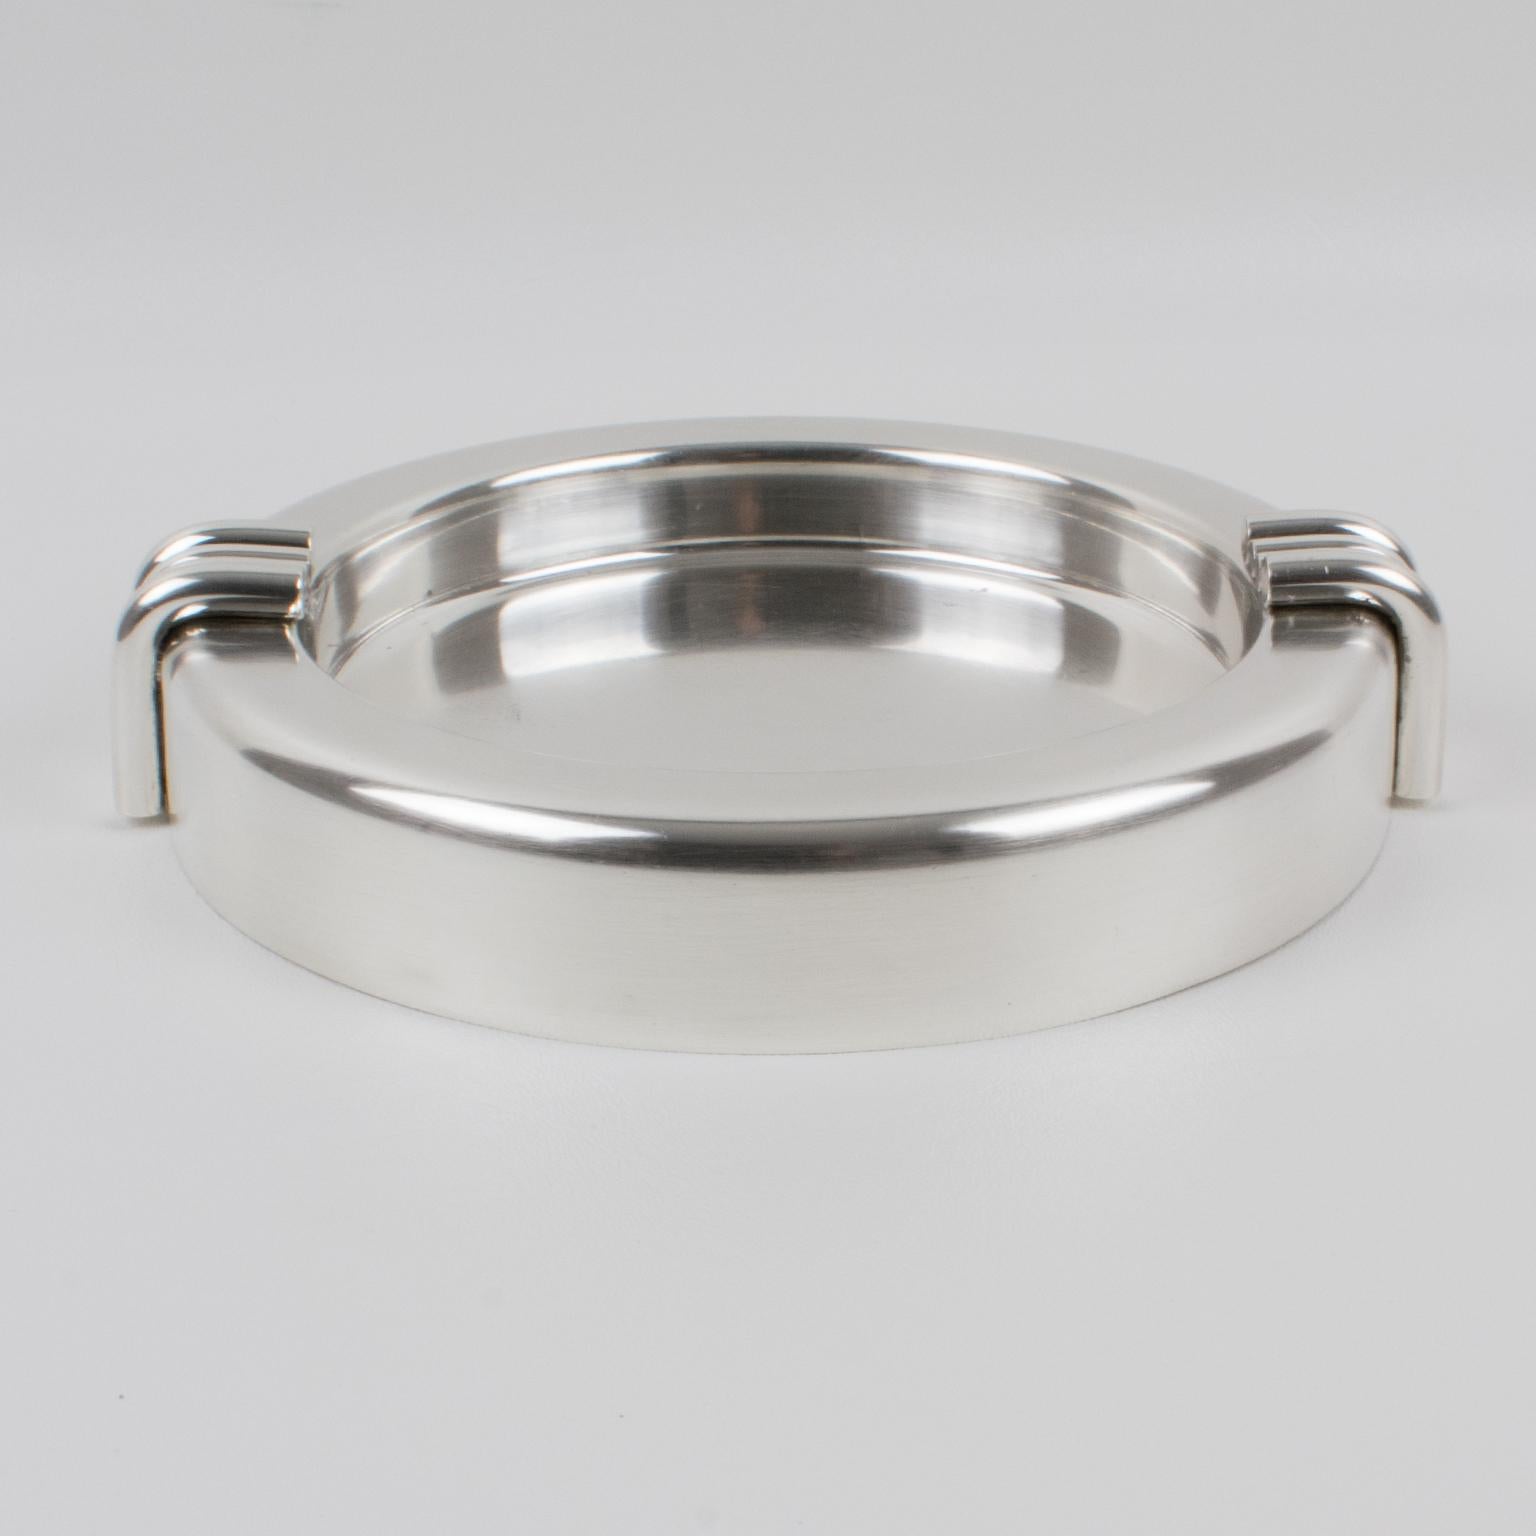 Elegant Christian Dior, Paris modernist large cigar ashtray or desk accessory. This silverplate sophisticated catchall features an iconic streamlined design with clean lines. Marked underside: Christian Dior.
Measurements: 7.88 in. diameter (20 cm)